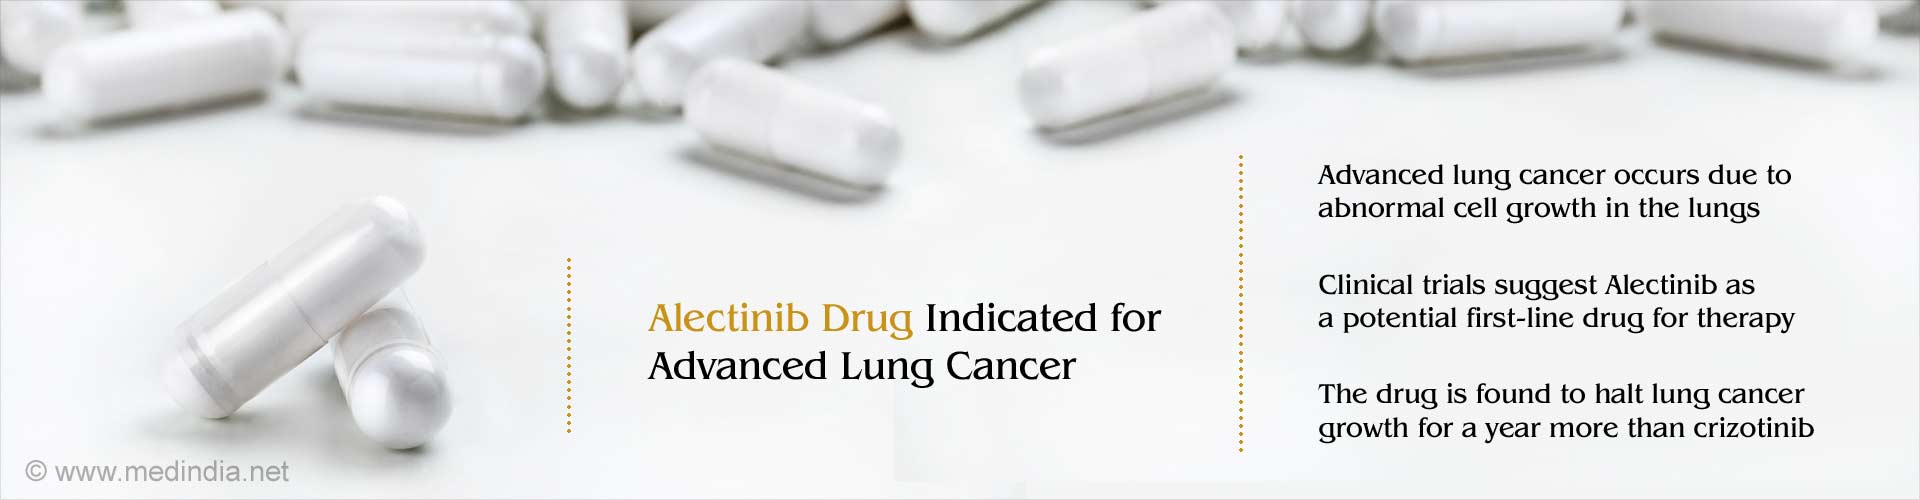 Alectinib drug indicated for advanced lung cancer
- Advanced lung cancer occurs due to abnormal cell growth in the lungs
- Clinical trials suggest Alectinib as a potential first-line drug for therapy
- The drug is found to halt lung-cancer growth for a year more than crizotinib